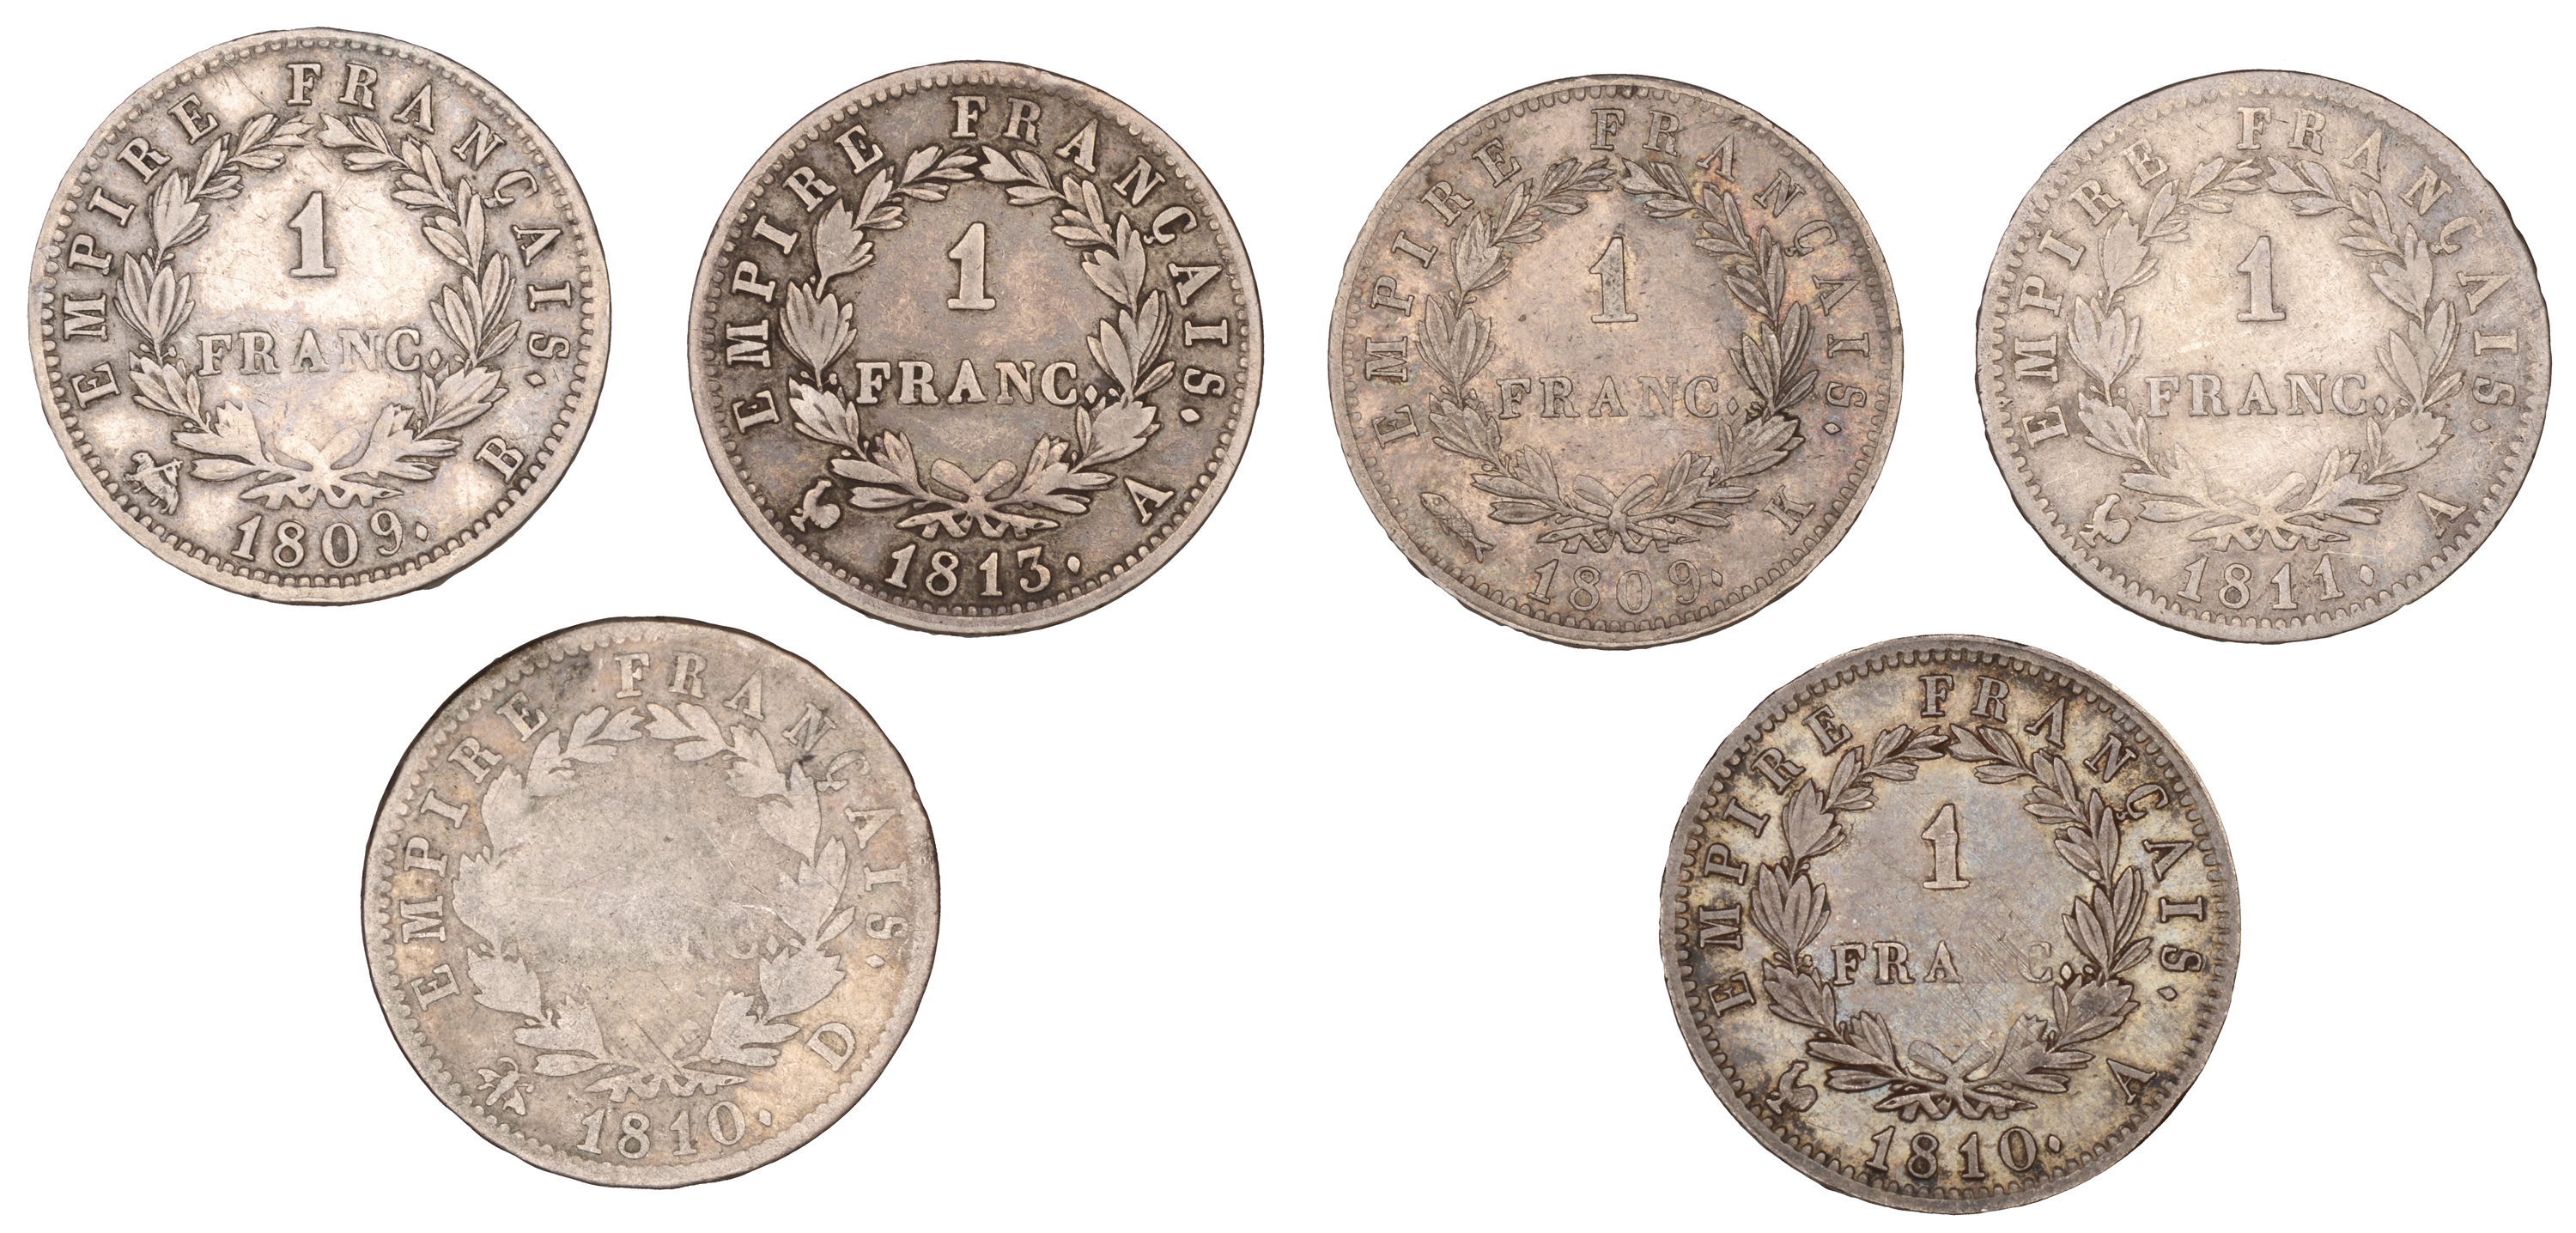 Napoleon I, Franc (6), 1809b, 1809k, 1810a, 1810d, 1811a, 1813a (Gad. 447) [6]. Varied state... - Image 2 of 2